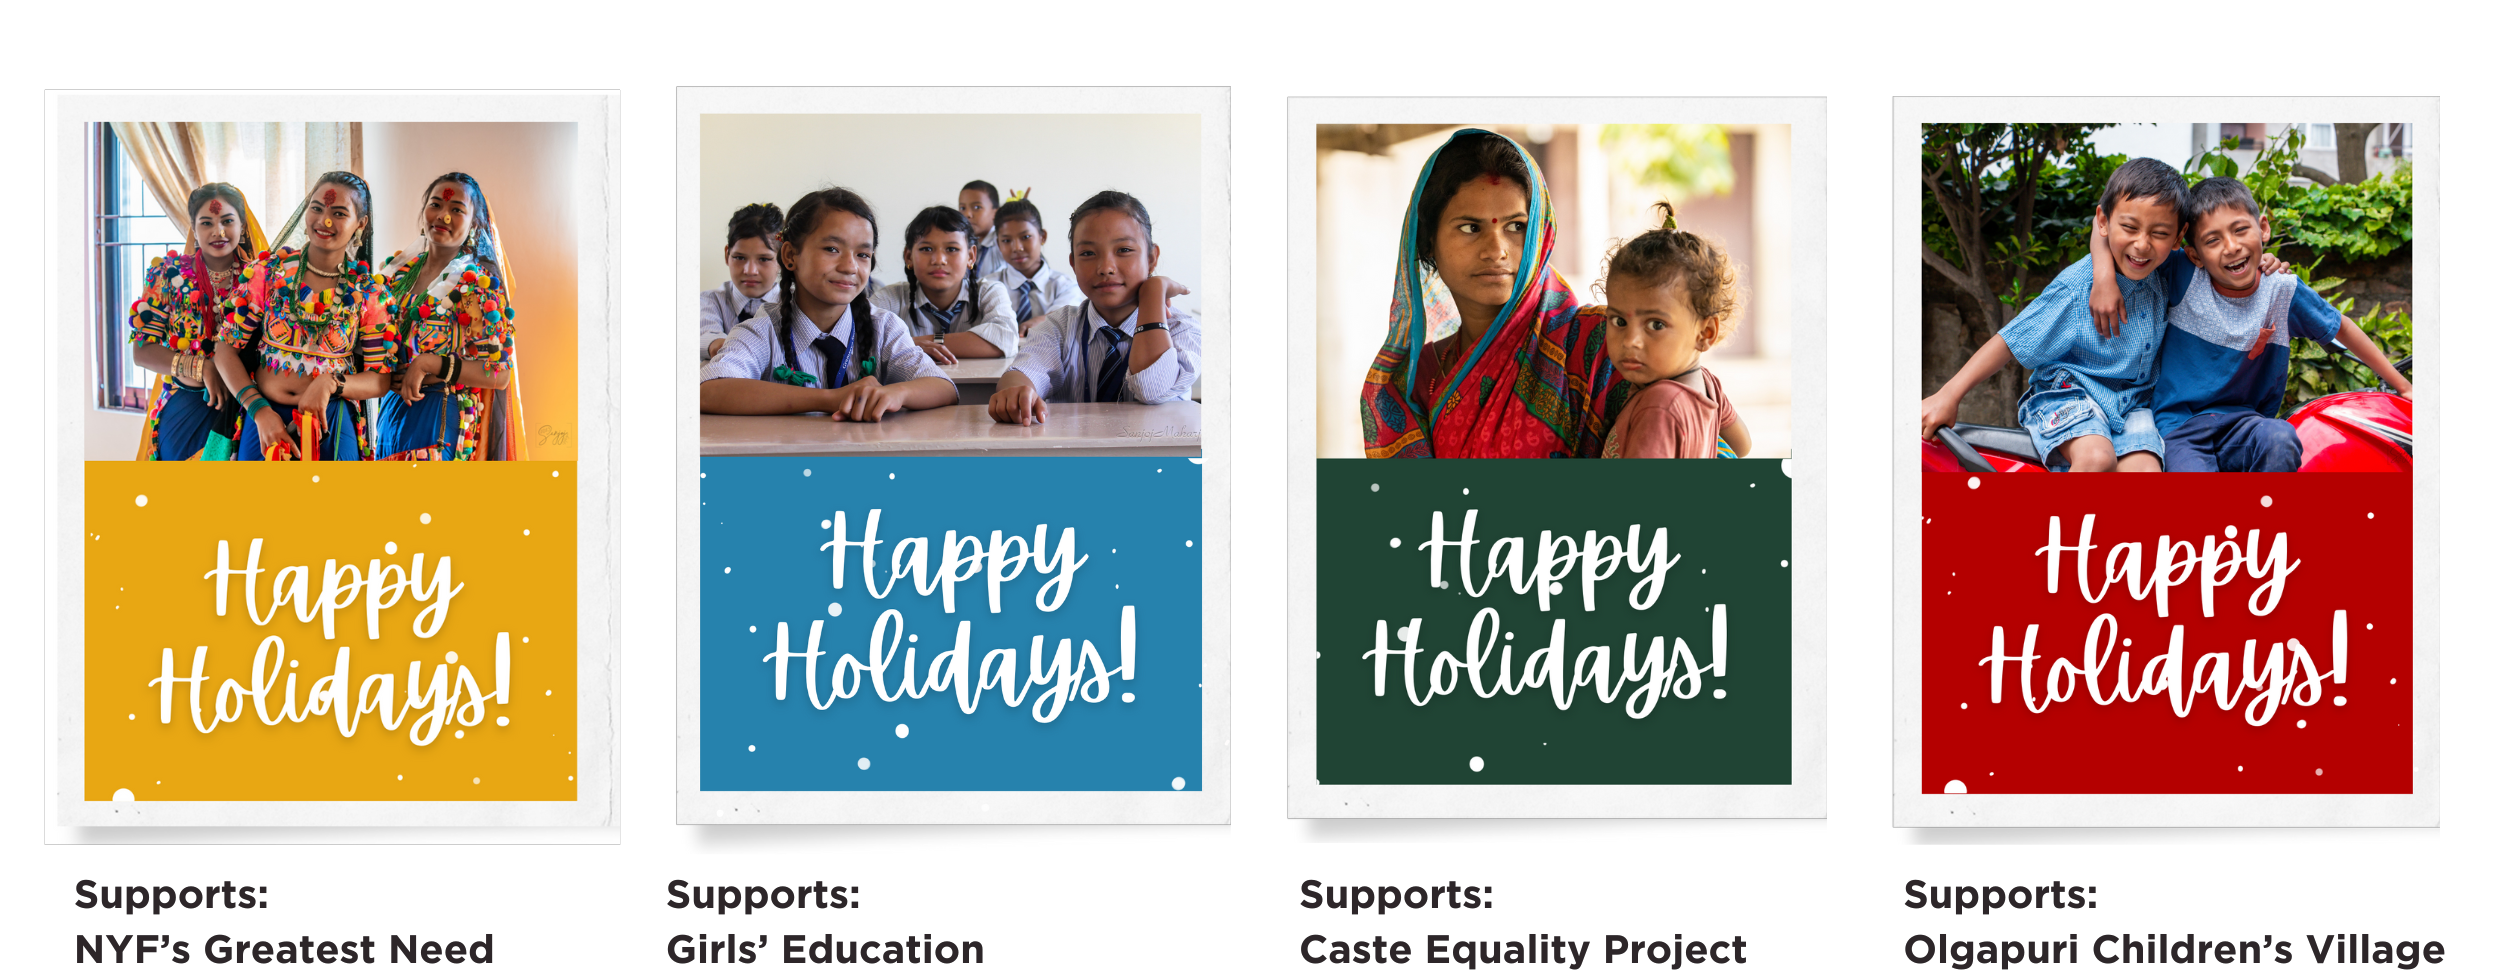 Choose between four cards: 1) supports NYF's greatest need 2) supports Girls' Education 3) supports Caste Equality Project 4) supports Olgapuri Children's Village,